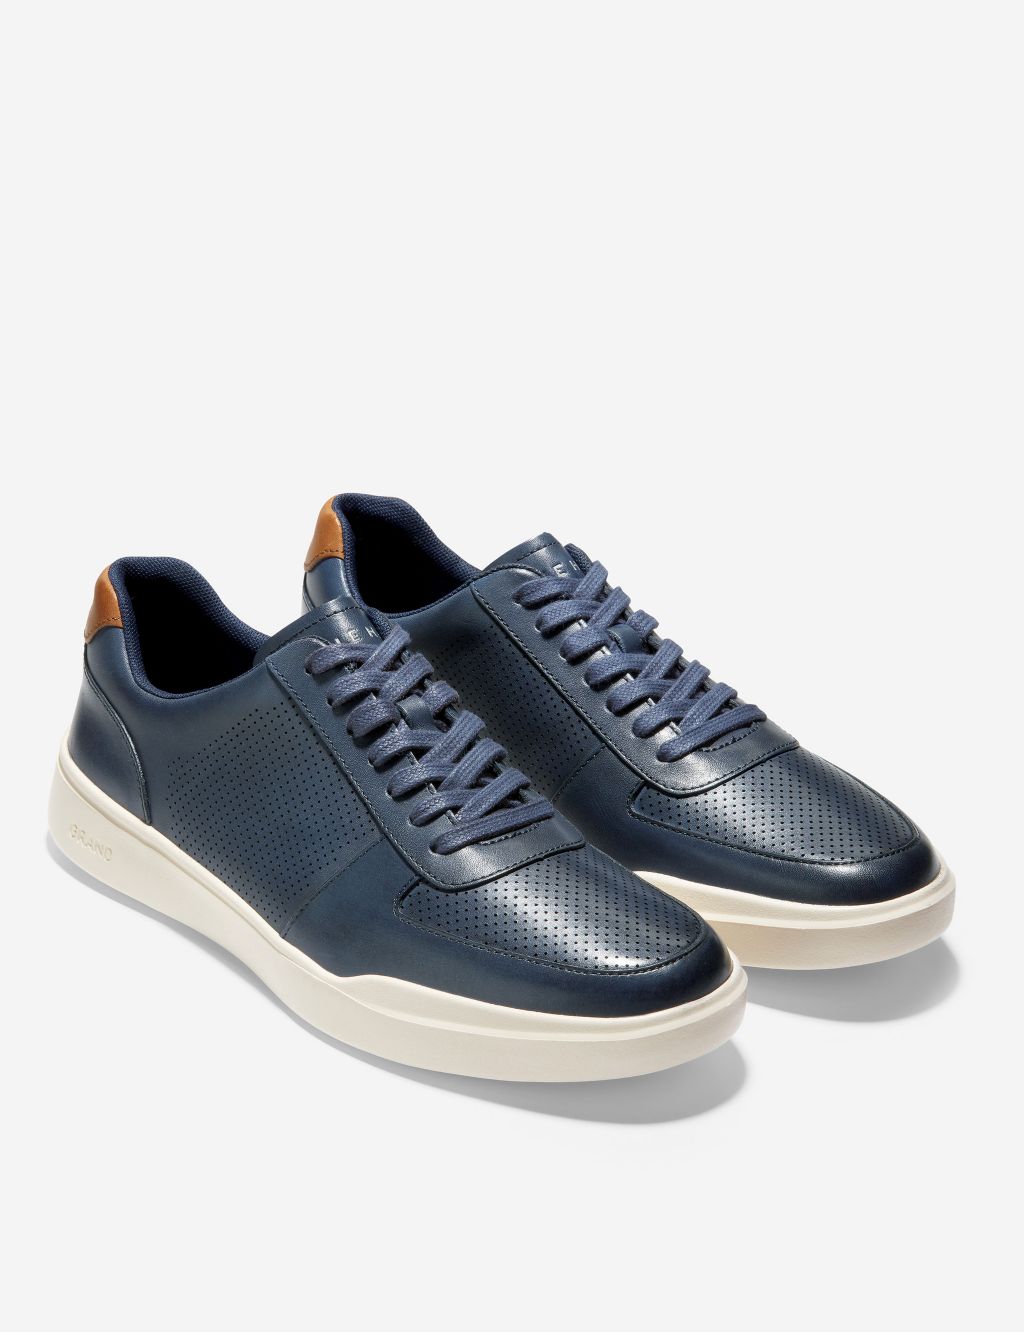 Grand Crosscourt Modern Wide Fit Trainers image 2